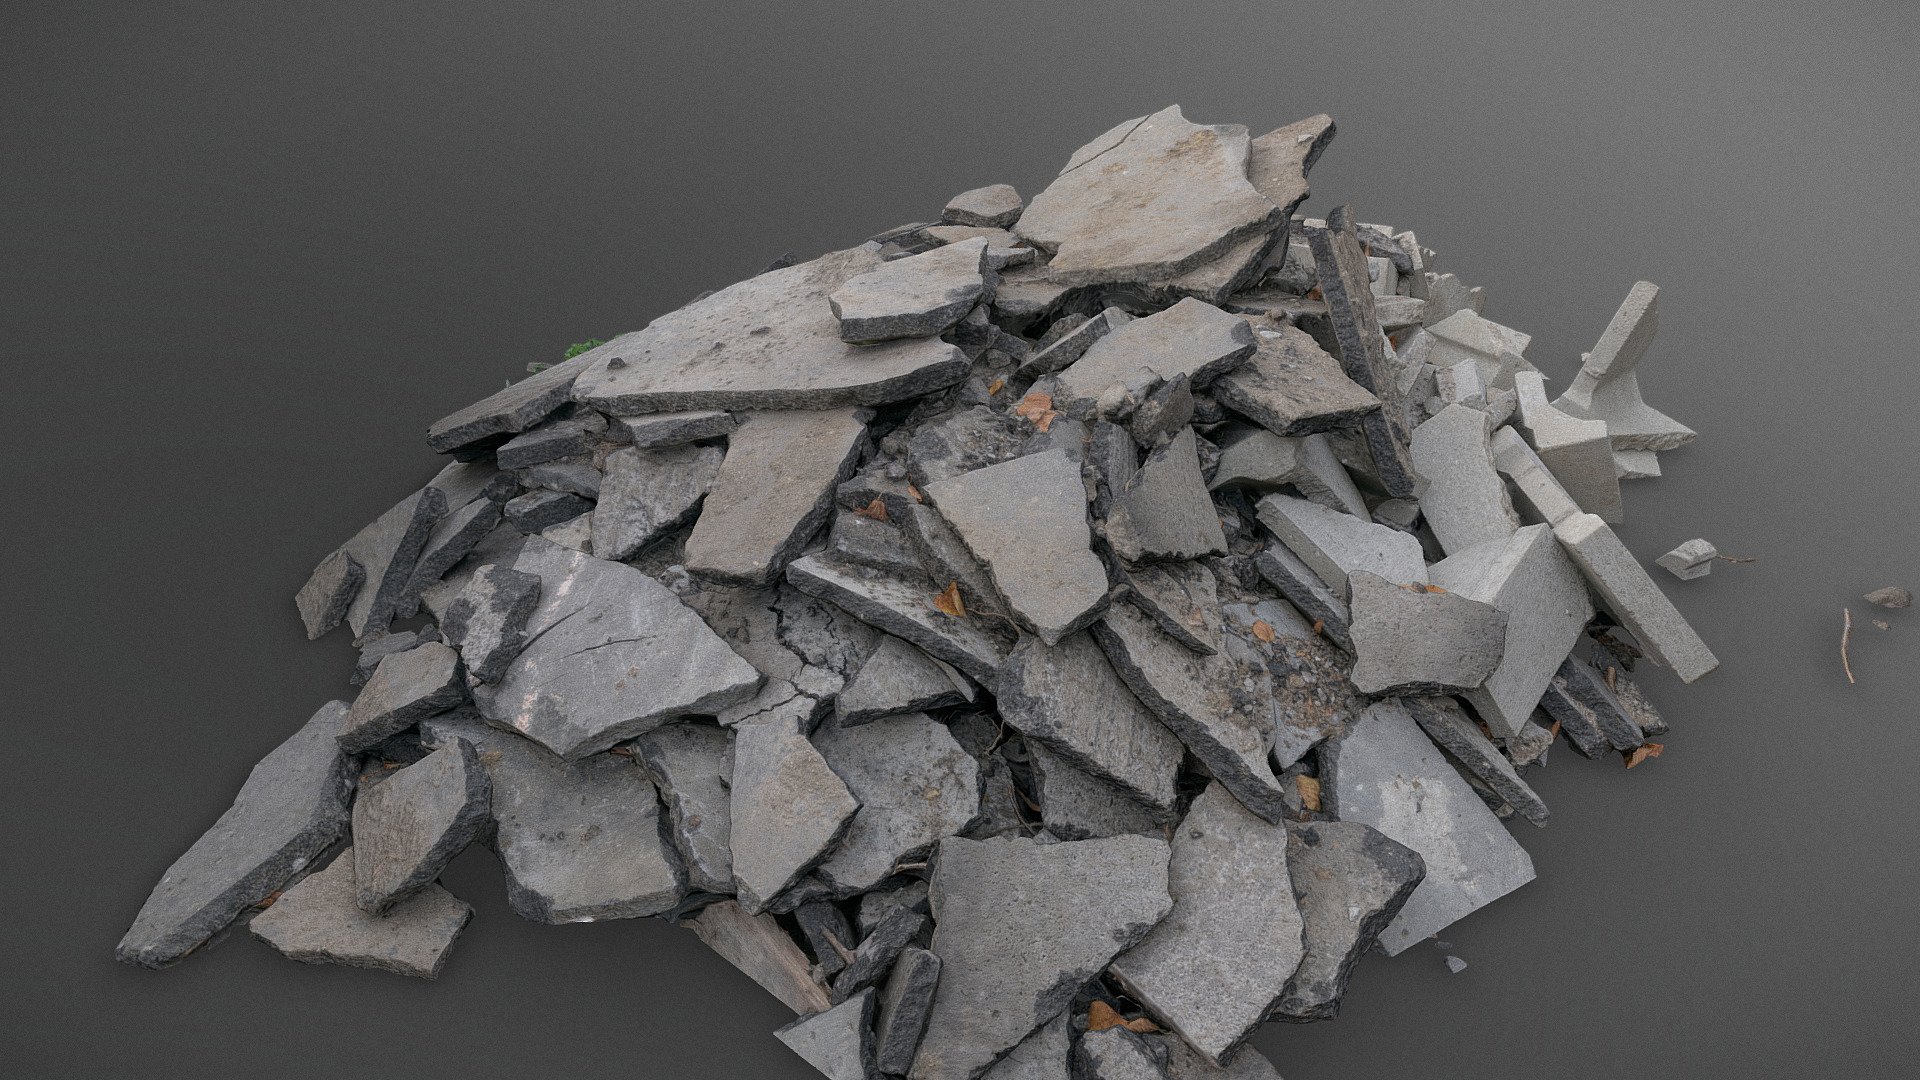 Old rough broken asphalt road pieces debris large heap salvage of destroyed street road highway construction material with some white concrete wall pavement sidewalk edge edging kerb, isolated from ground pile heap

Photogrammetry scan (180 x 36 MP, 3x8K texture + HD Normals ) - Road constrctuion shards - Buy Royalty Free 3D model by matousekfoto 3d model